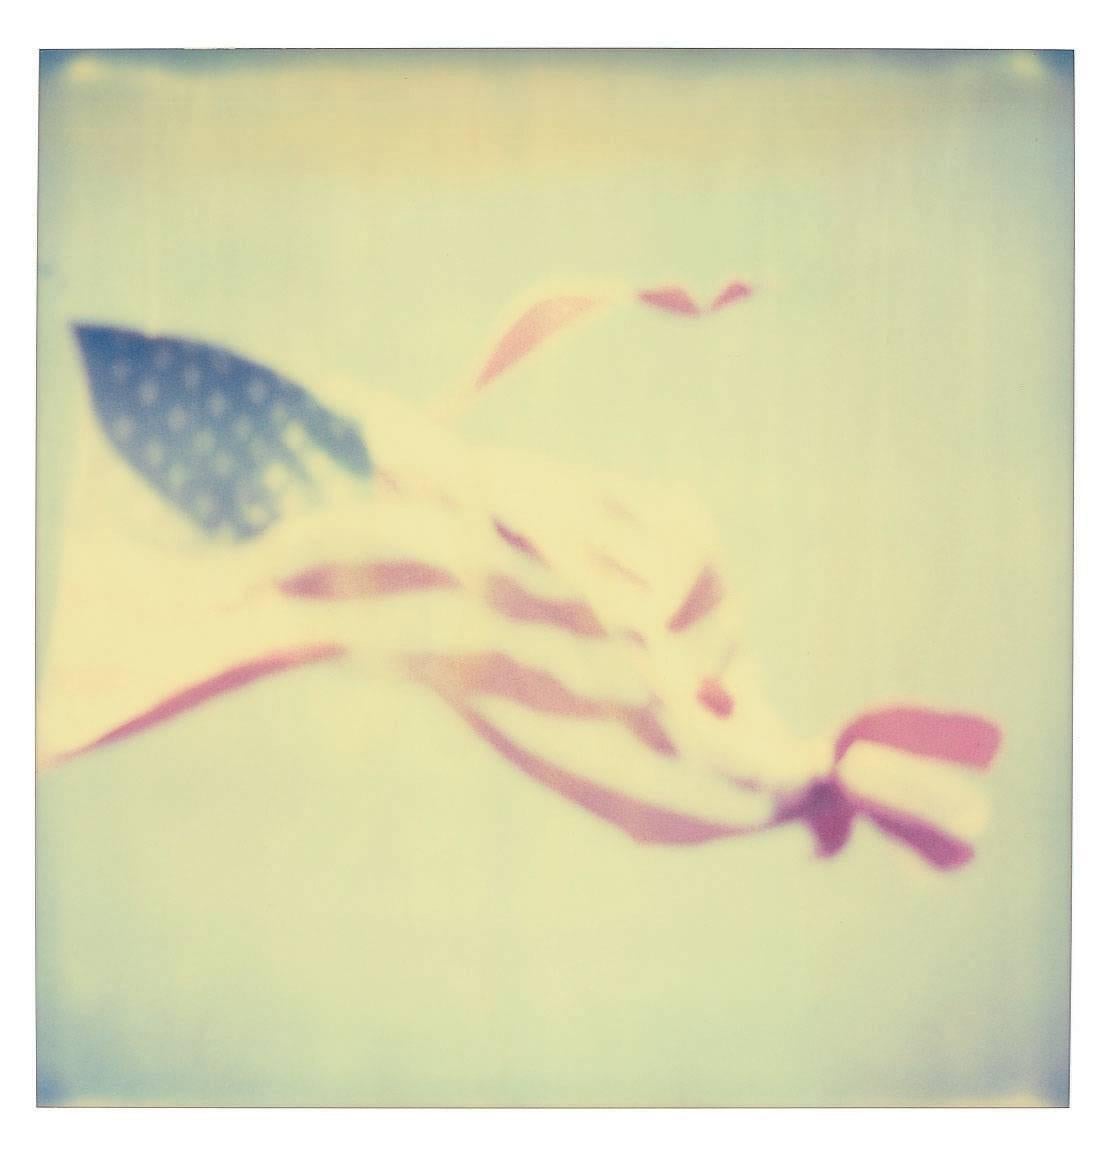 Primary Colors - Contemporary, Figurative, Icons, Polaroid, Photograph, expired For Sale 8